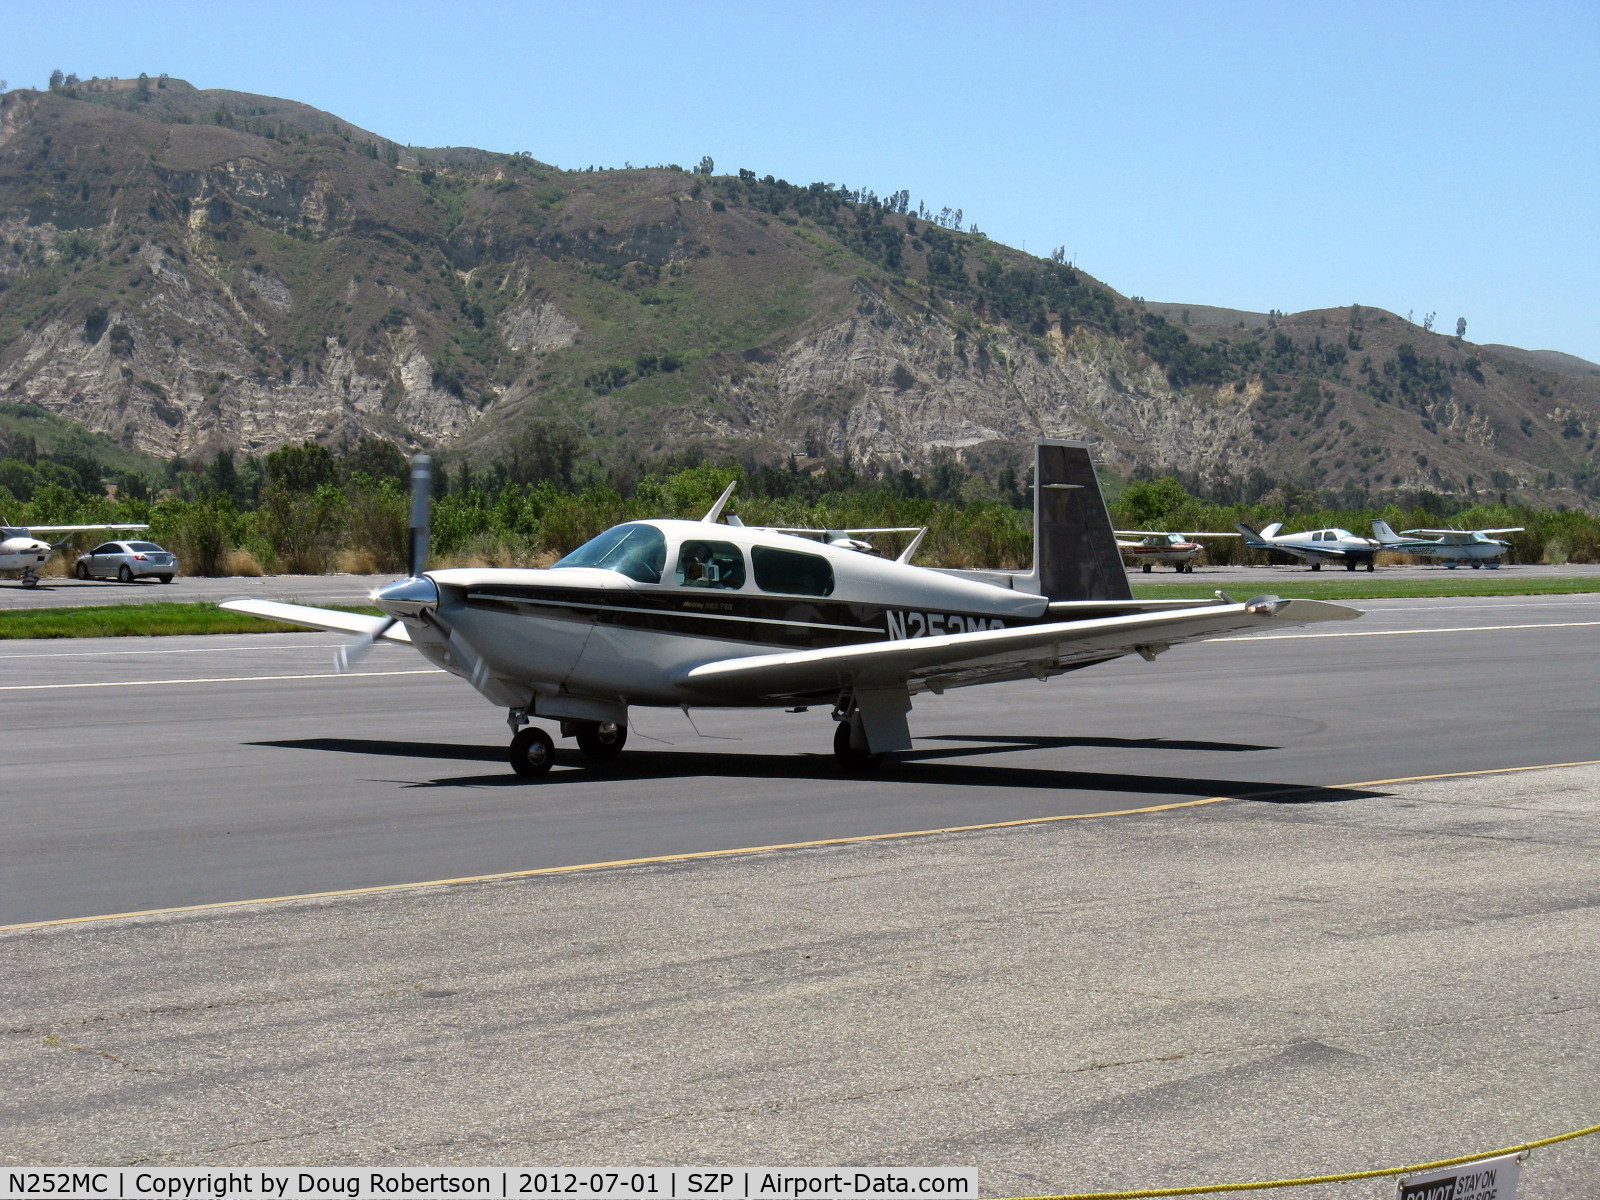 N252MC, 1986 Mooney M20K C/N 25-1023, 1986 Mooney M20K 252. Continental TSIO-360-MB(1) 210 Hp inter-cooled turbocharger with Garrett variable wastegate, 28 V. electrics, 67 were built as 1986 models, taxi to 22